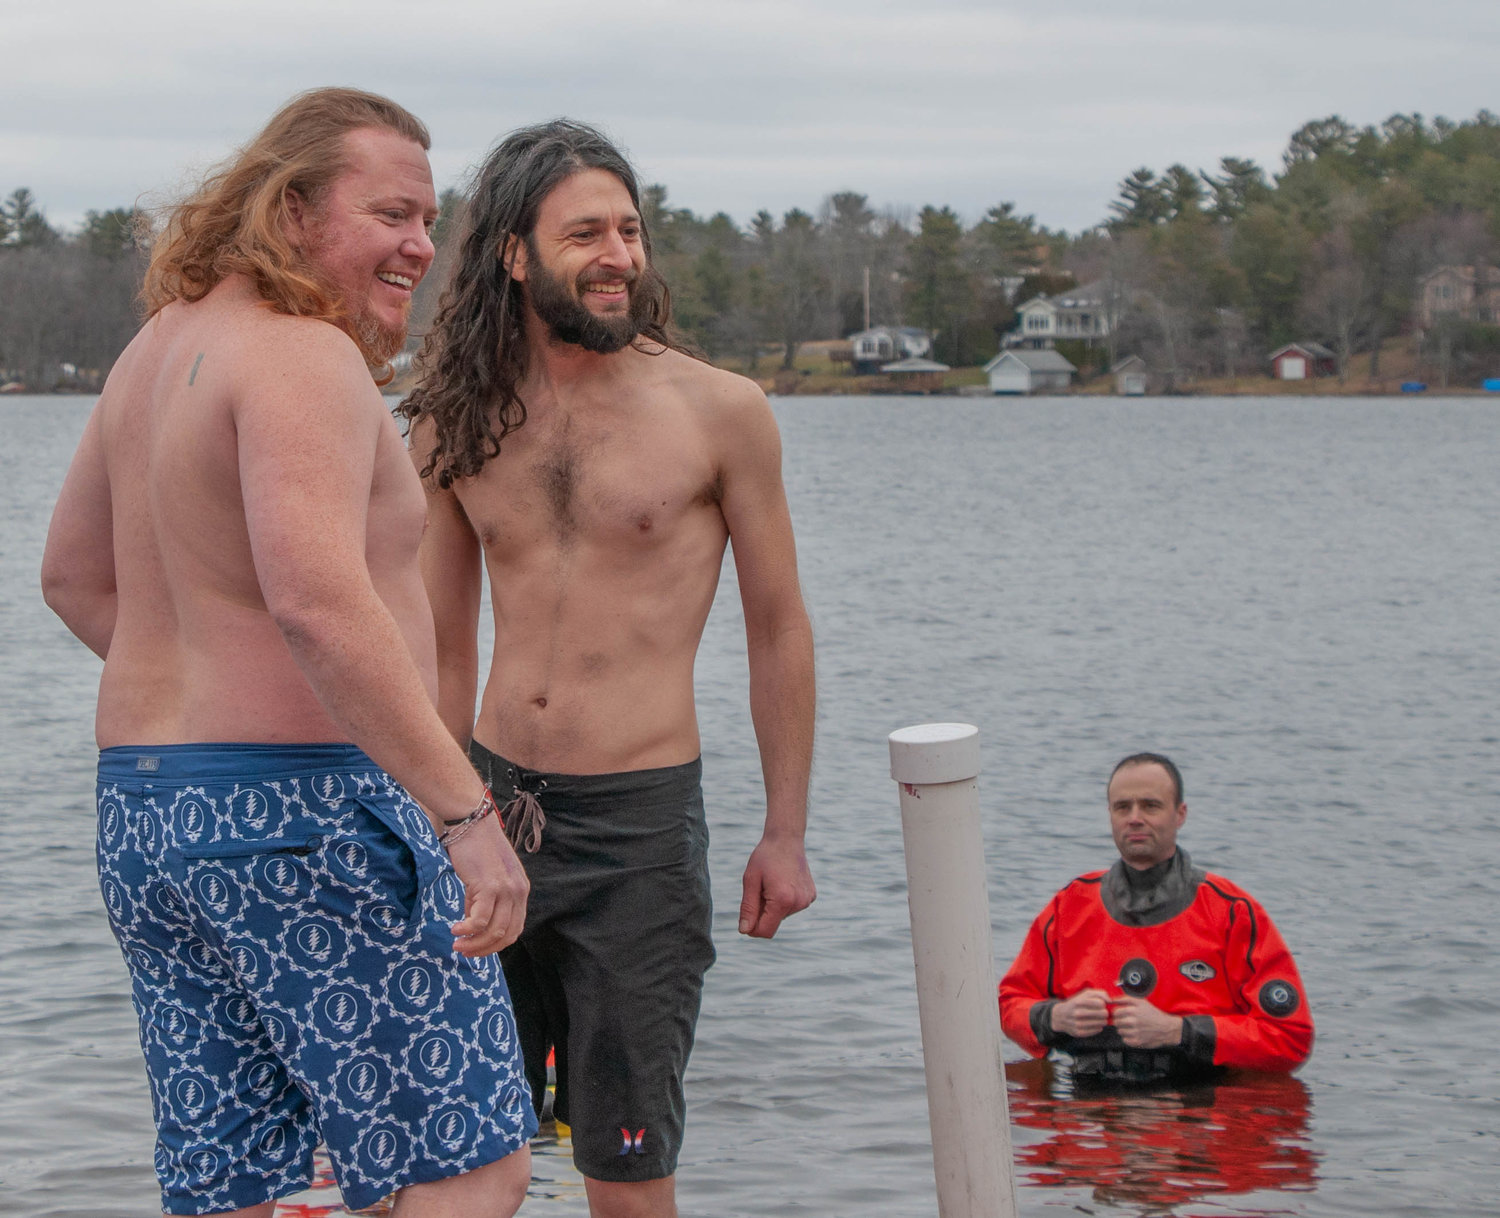 Team Hector's members Uriah Conklin, left, and Jake Friehling didn't look too cold before leaping into the freezing waters of White Lake last Saturday. Then they were cold...The jump was part of the "Sullivan County Freeze for the Cure" event that benefited the Alzheimer's Association.